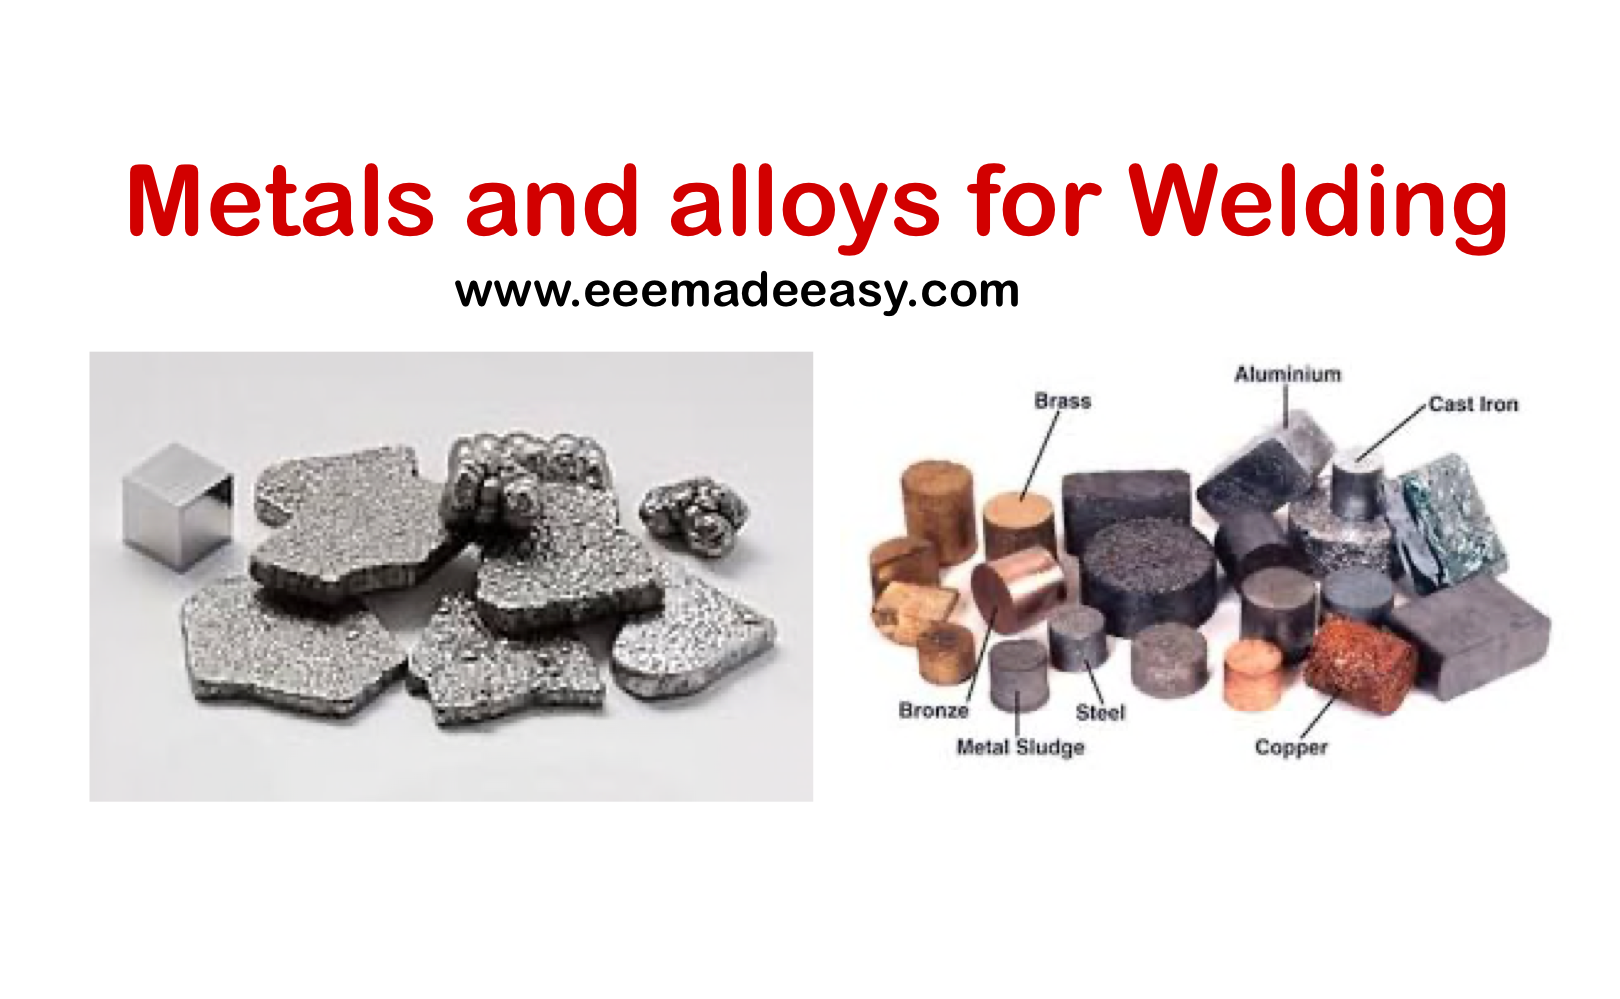 Metals and alloys for welding